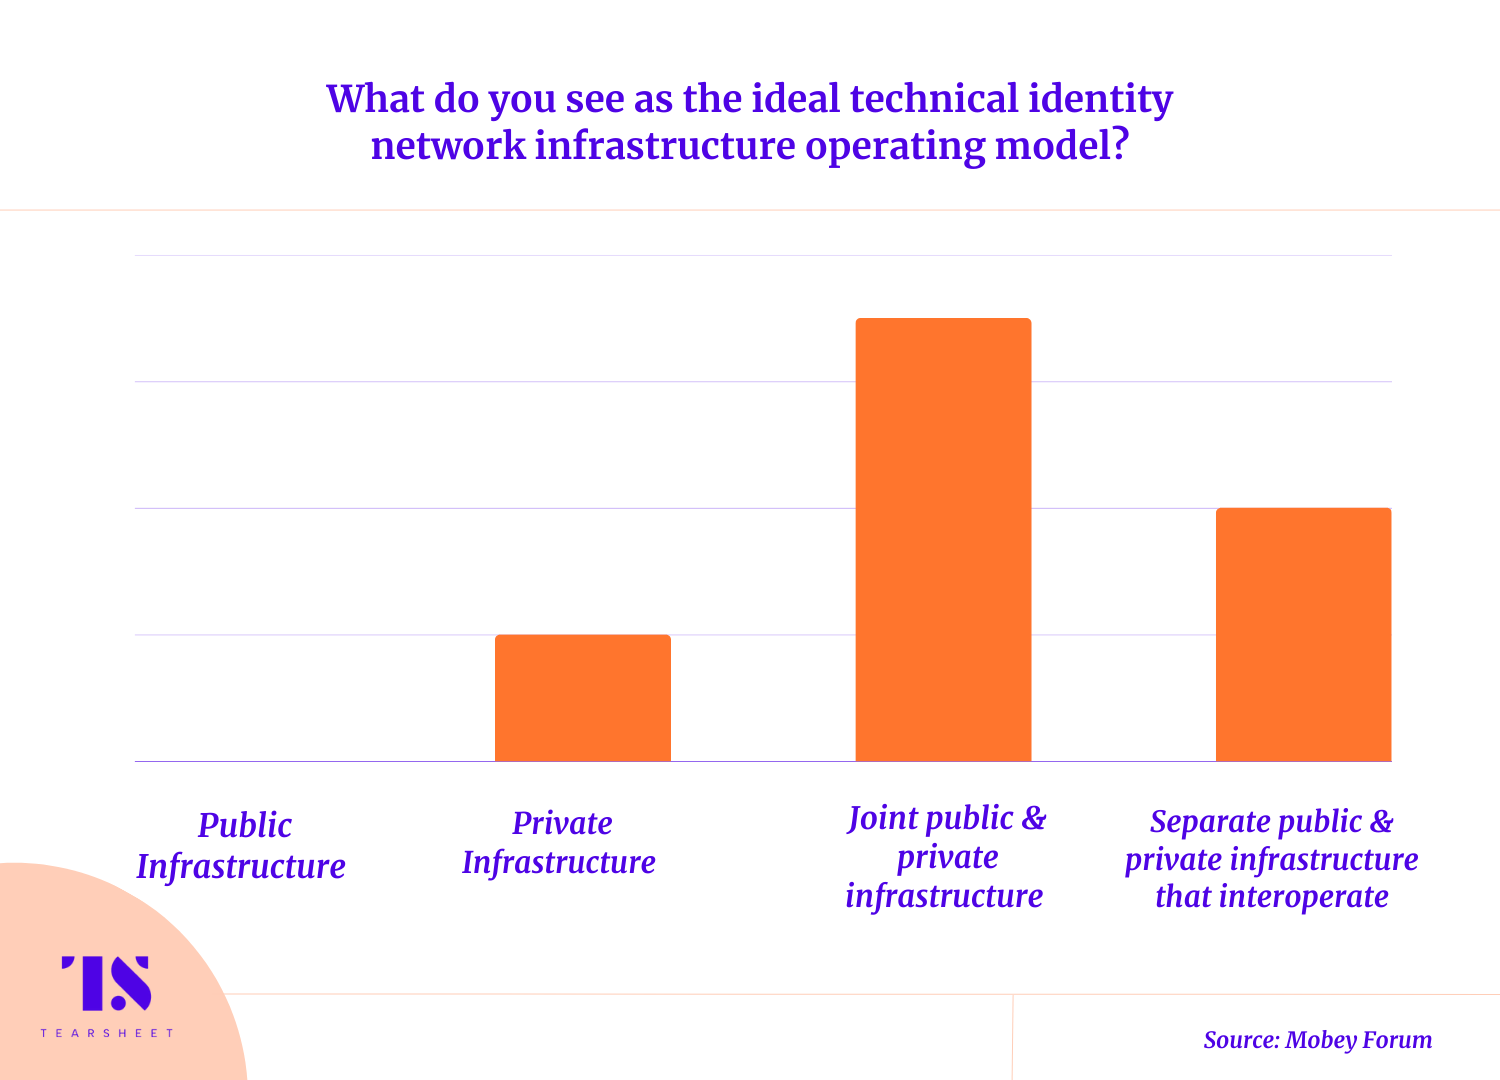 What do you see as the ideal technical identity network infrastructure operating model? 